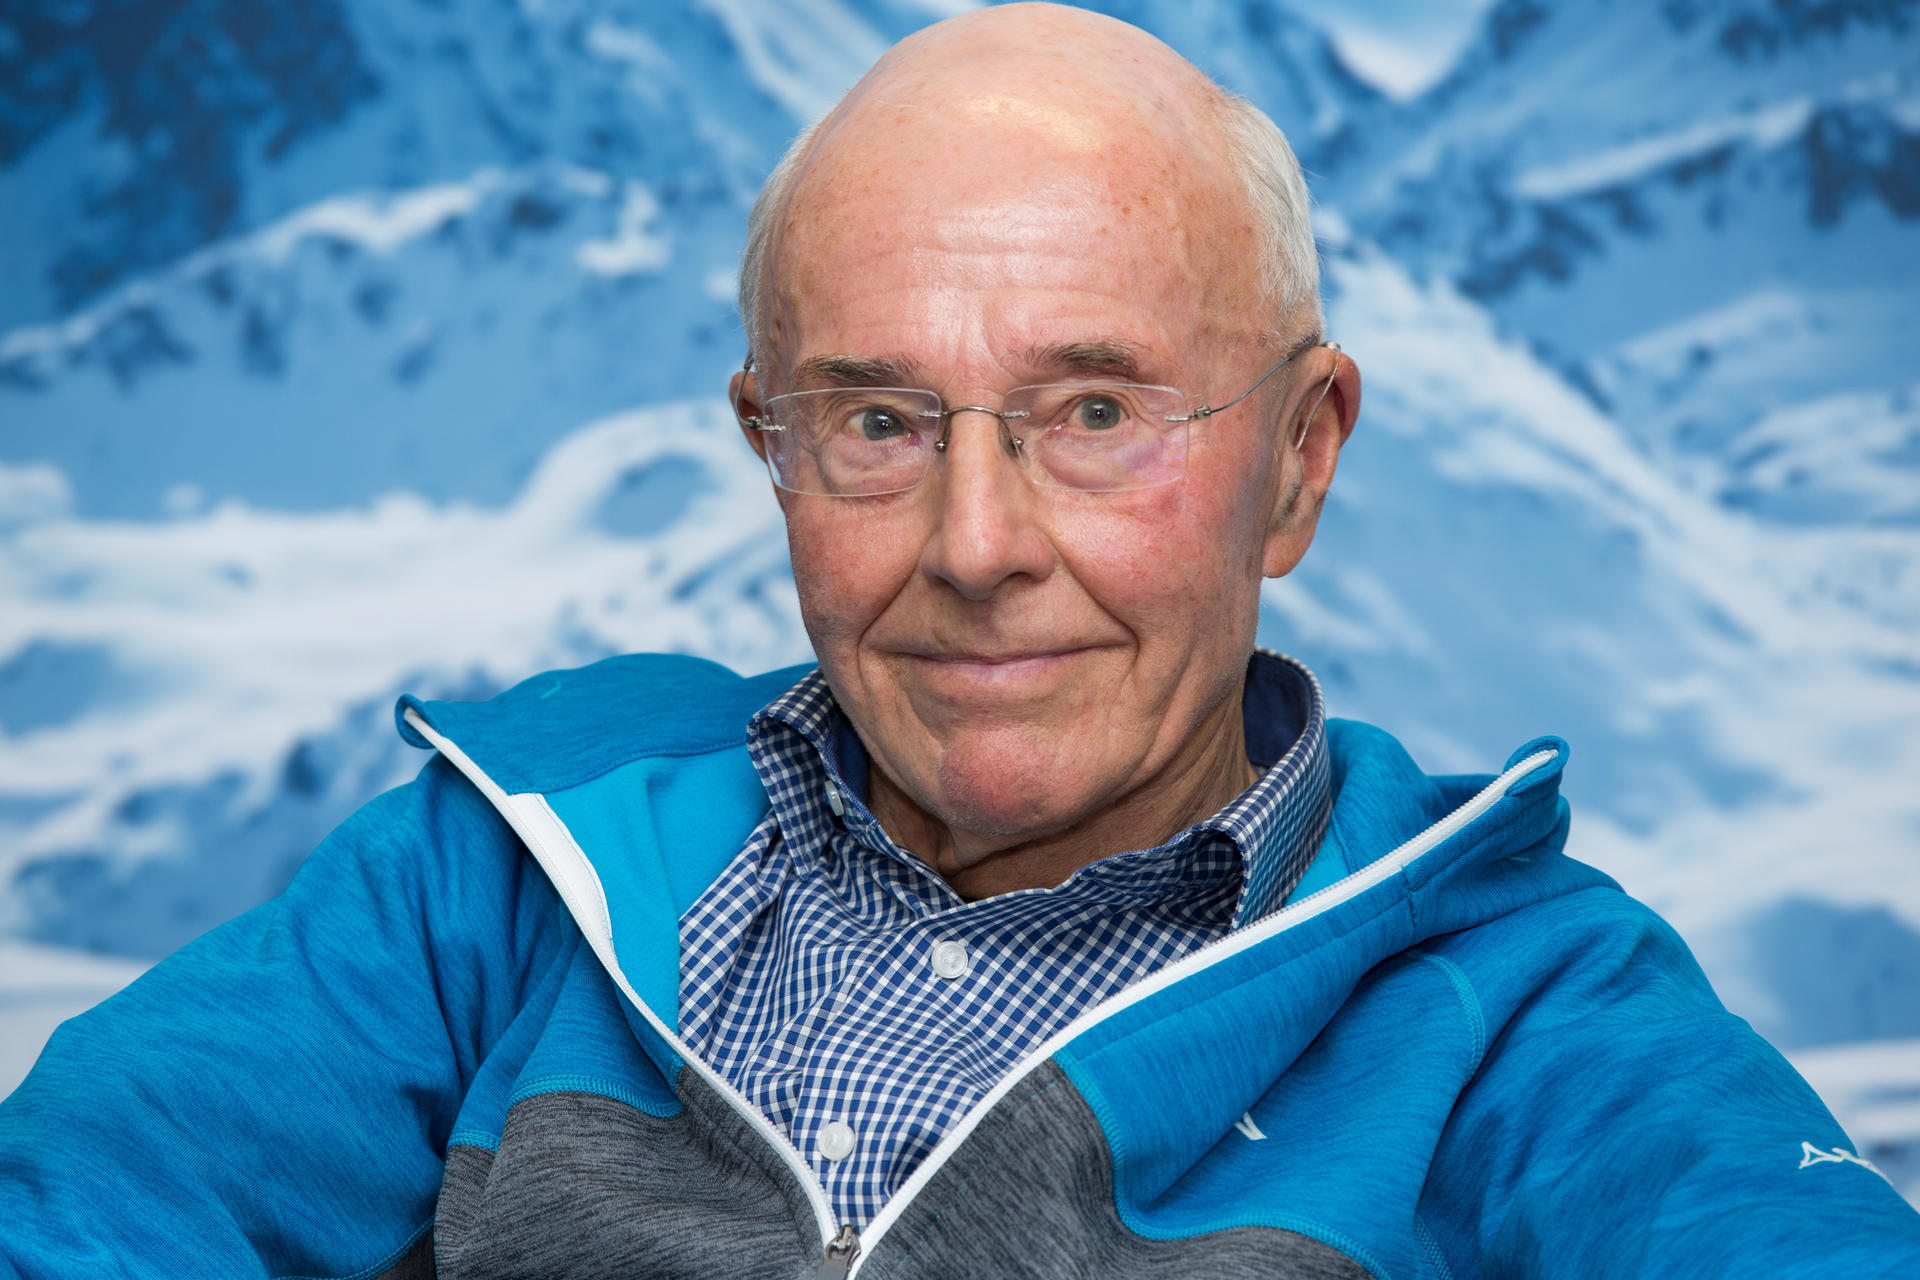 Mourning for outdoor legend: 